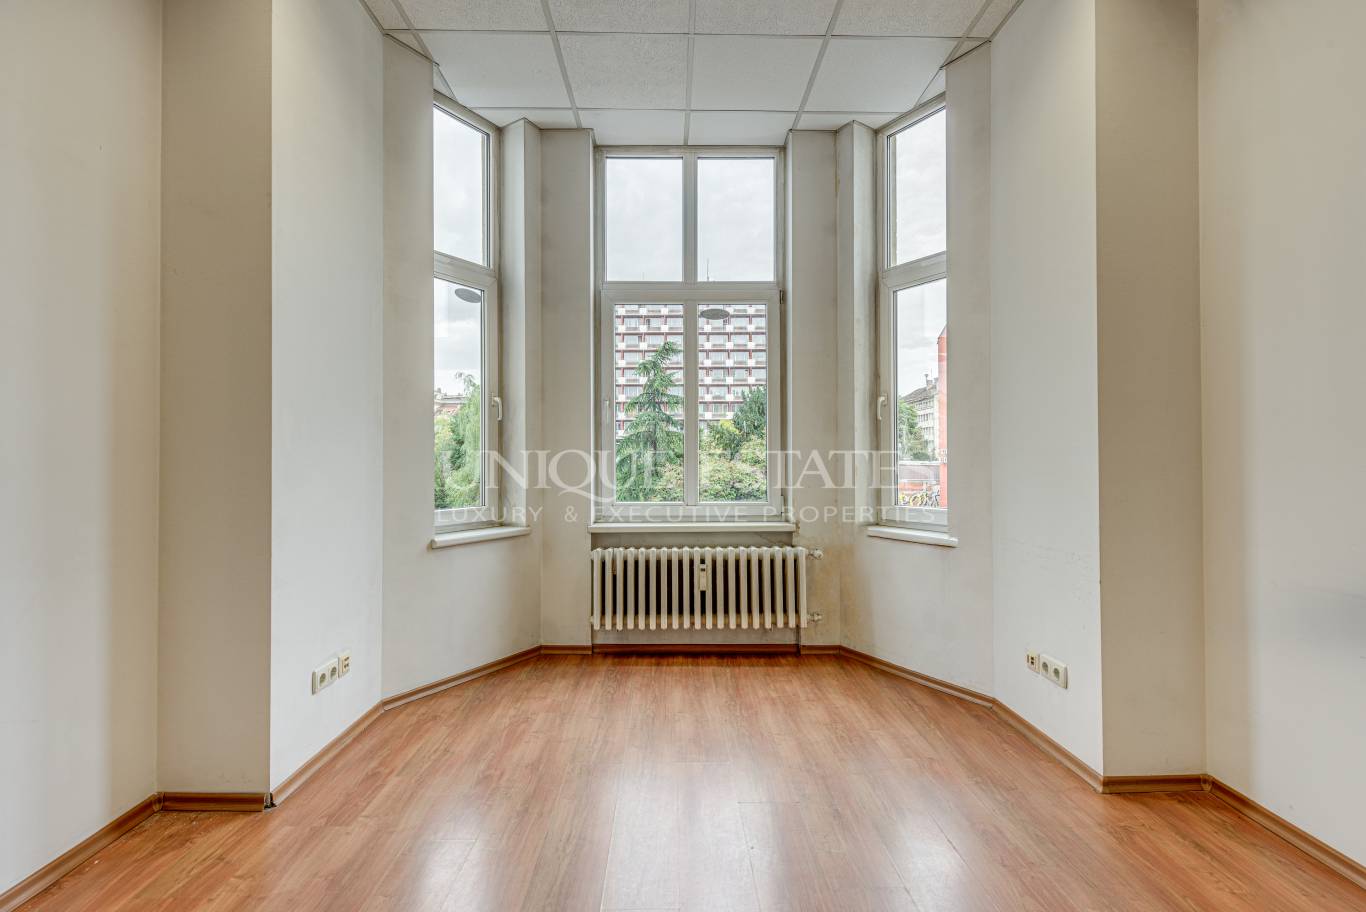 Office for rent in Sofia, Downtown with listing ID: K4831 - image 3